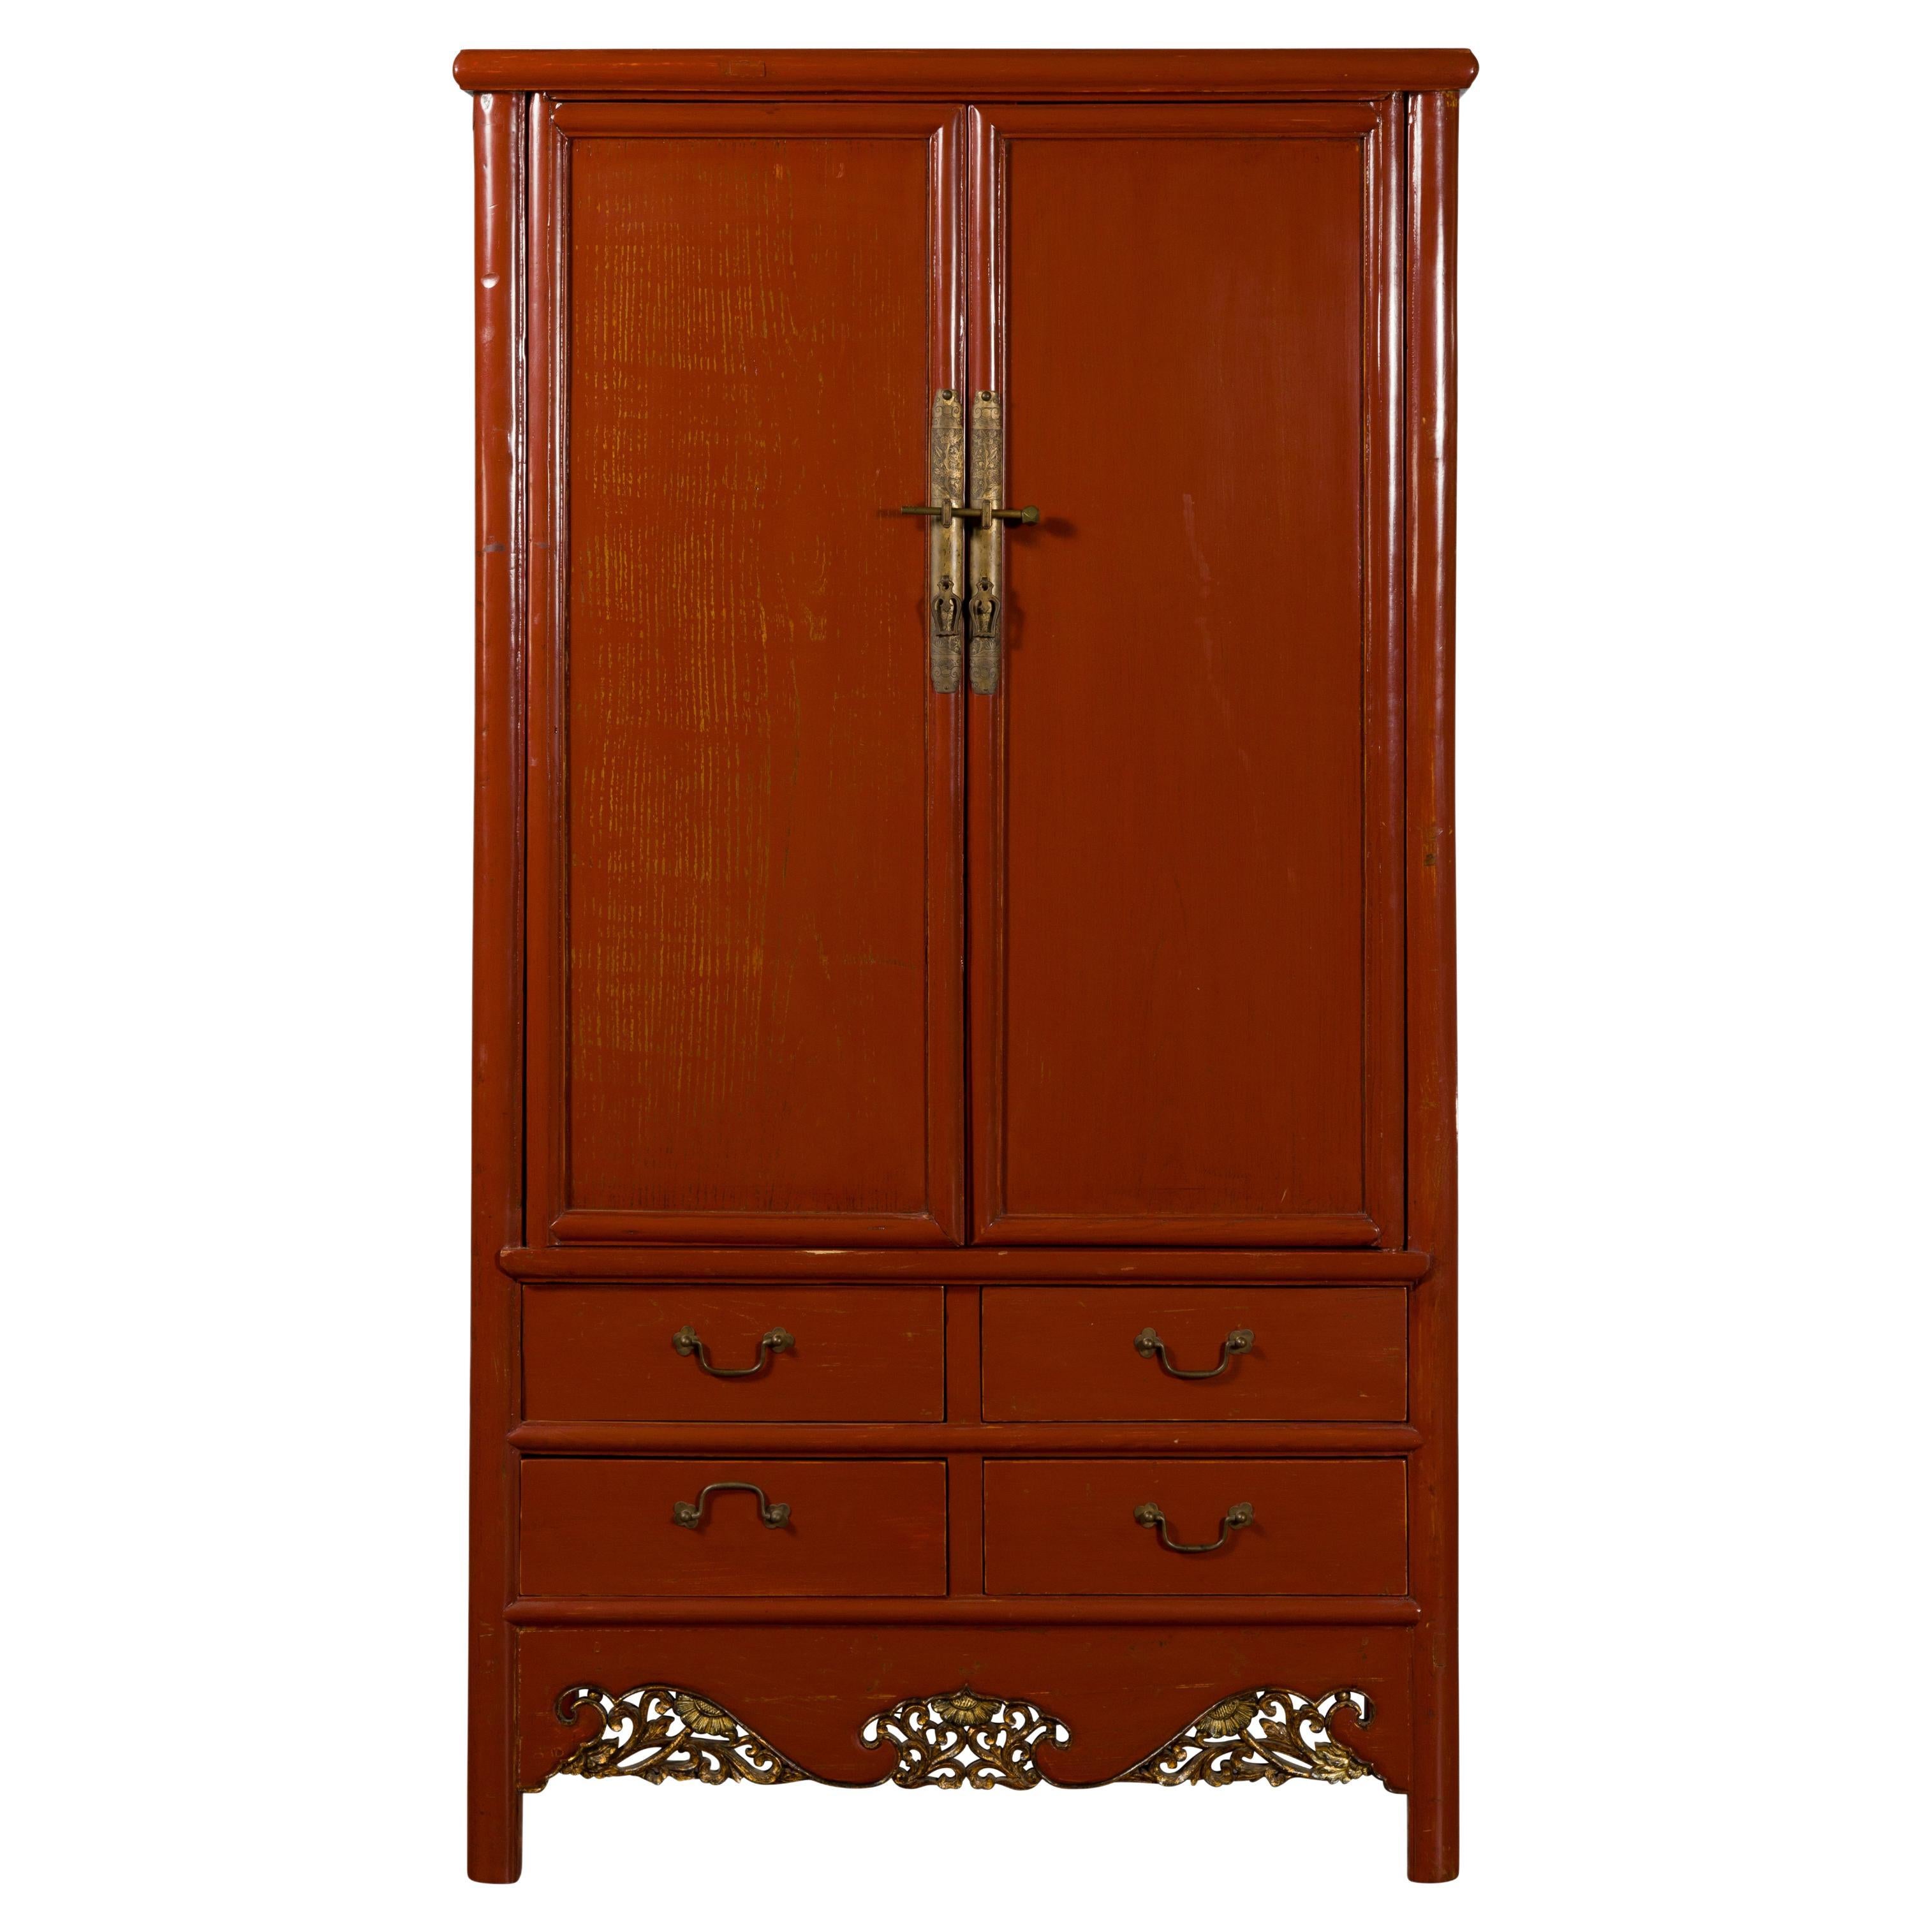 Chinese Red Lacquer Ming Dynasty Style Cabinet with Floral-Carved Gilt Apron